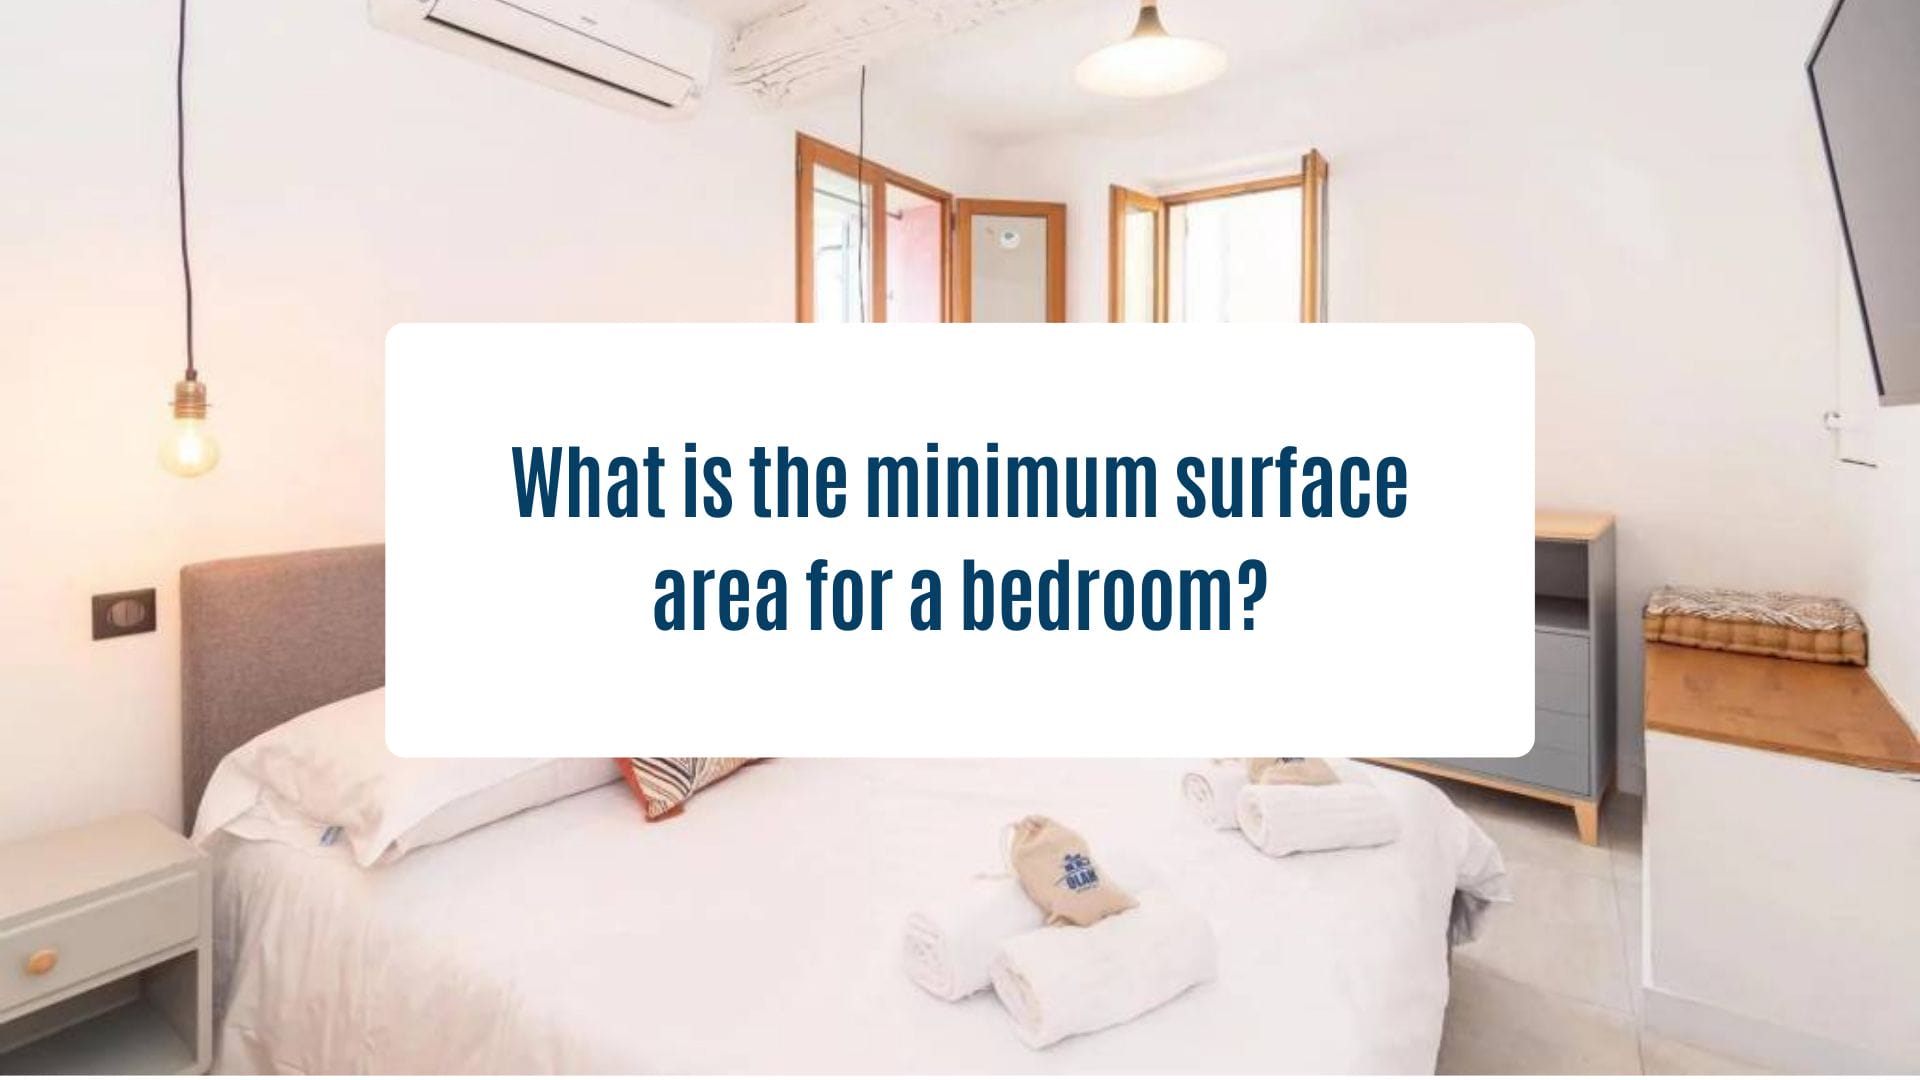 News Olam Properties - What is the minimum surface area for a bedroom?